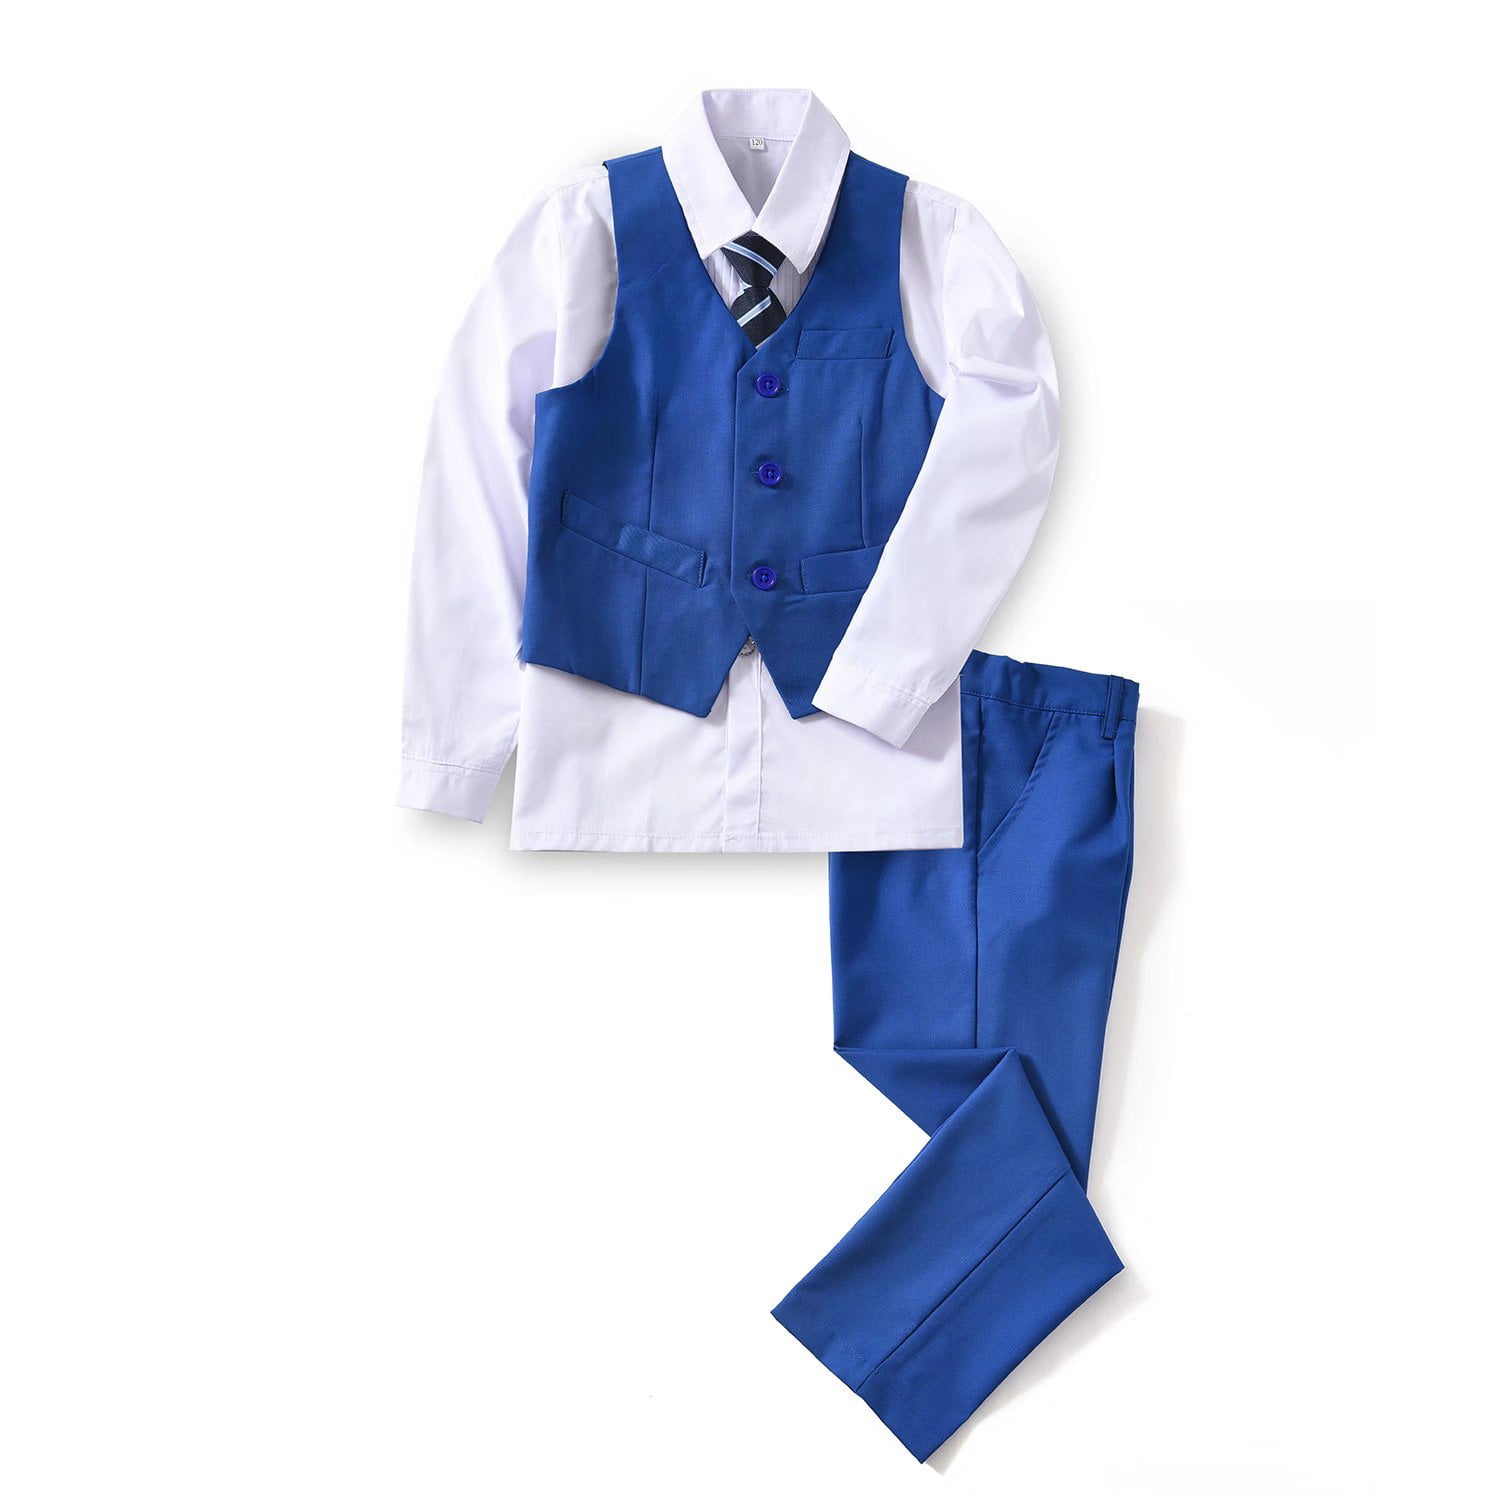 3pc Romper Tuxedo with Long Sleeve Shirt Bow Tie Necktie Gentleman for Wedding and Party CARETOO Suit Baby Kids Boys Clothing Sets Vest Pant 